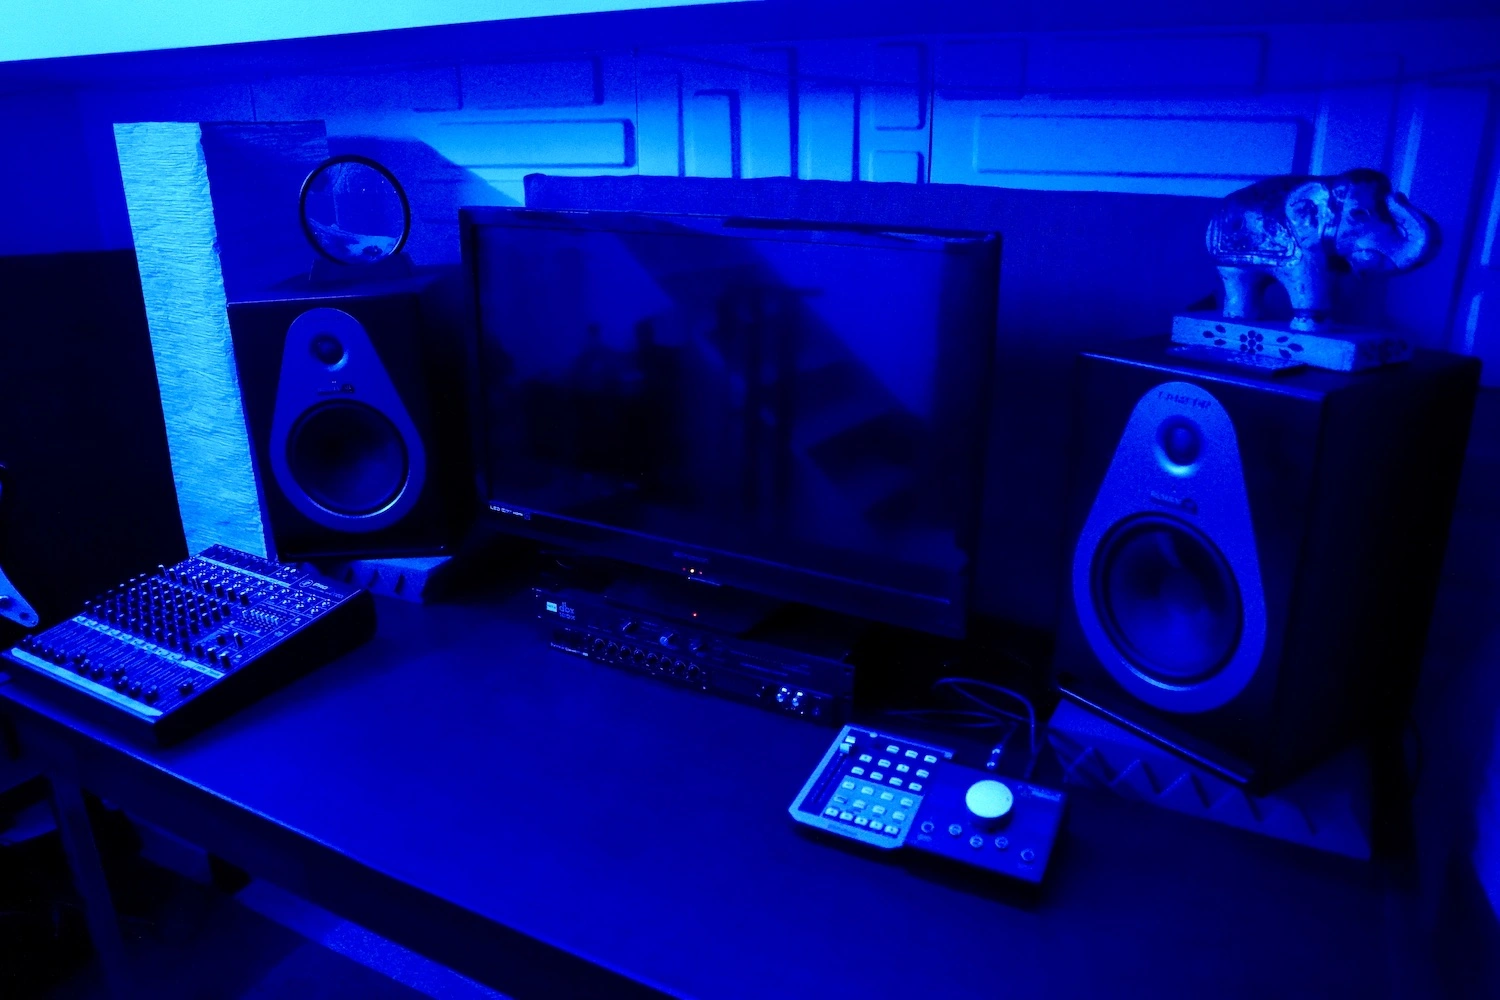 Studio Desk With Interface and Speakers